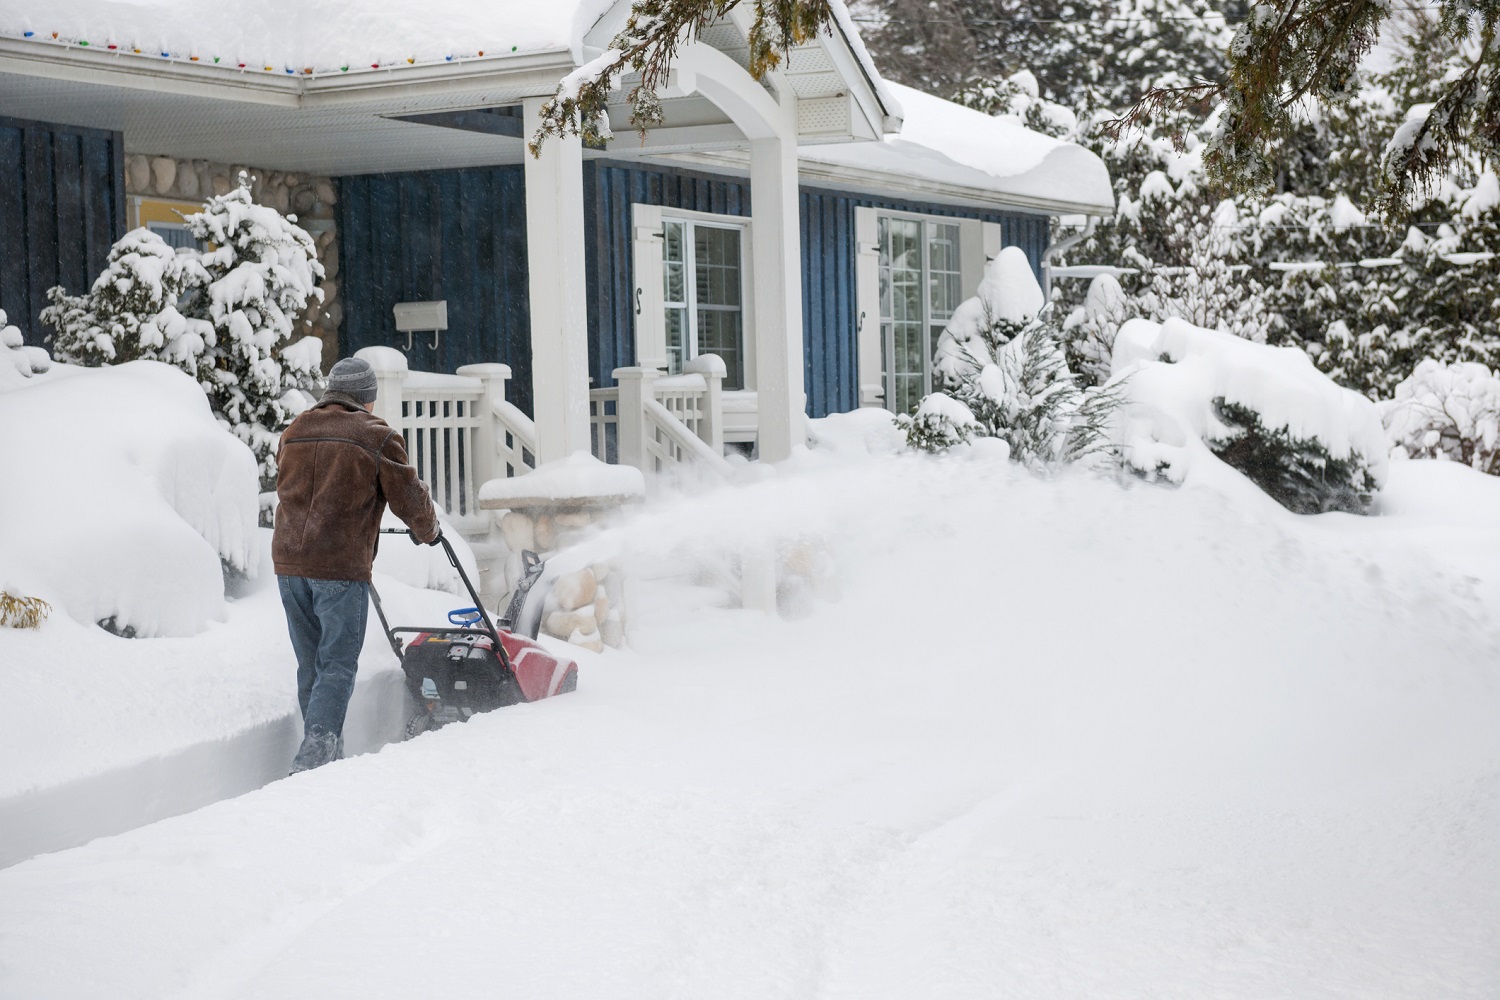 Holy snowflake! 10 tips for winter storm safety